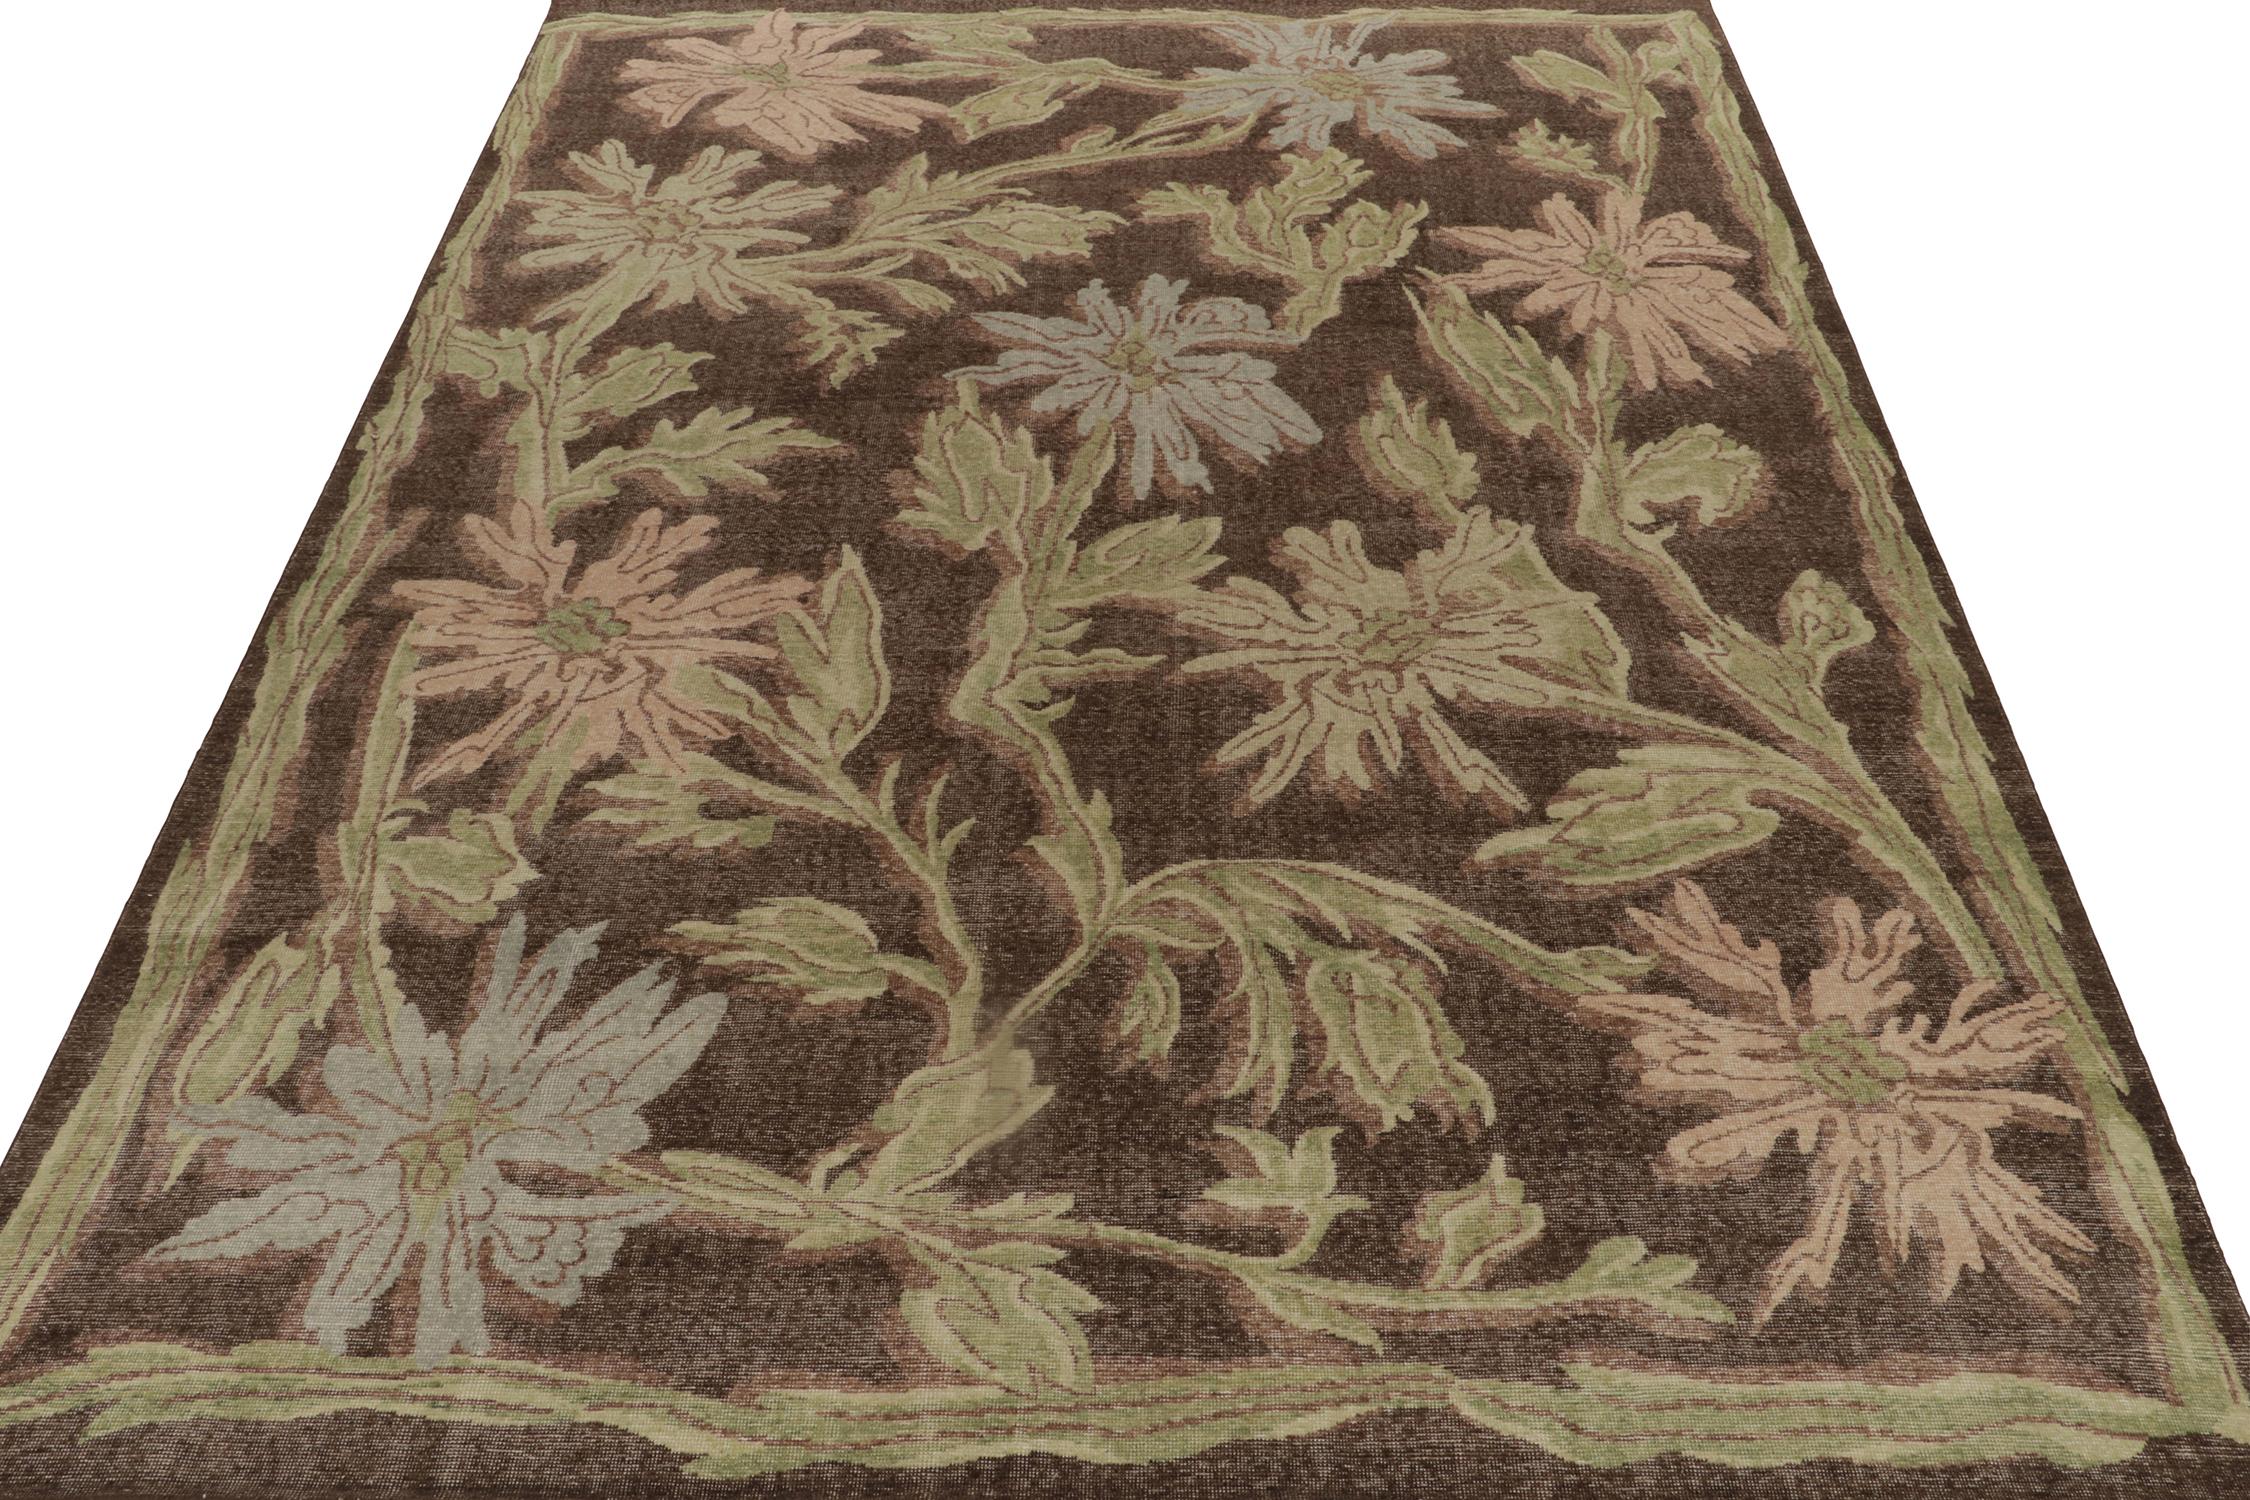 Modern Rug & Kilim’s Distressed Style Rug in Brown and Green Floral Patterns For Sale